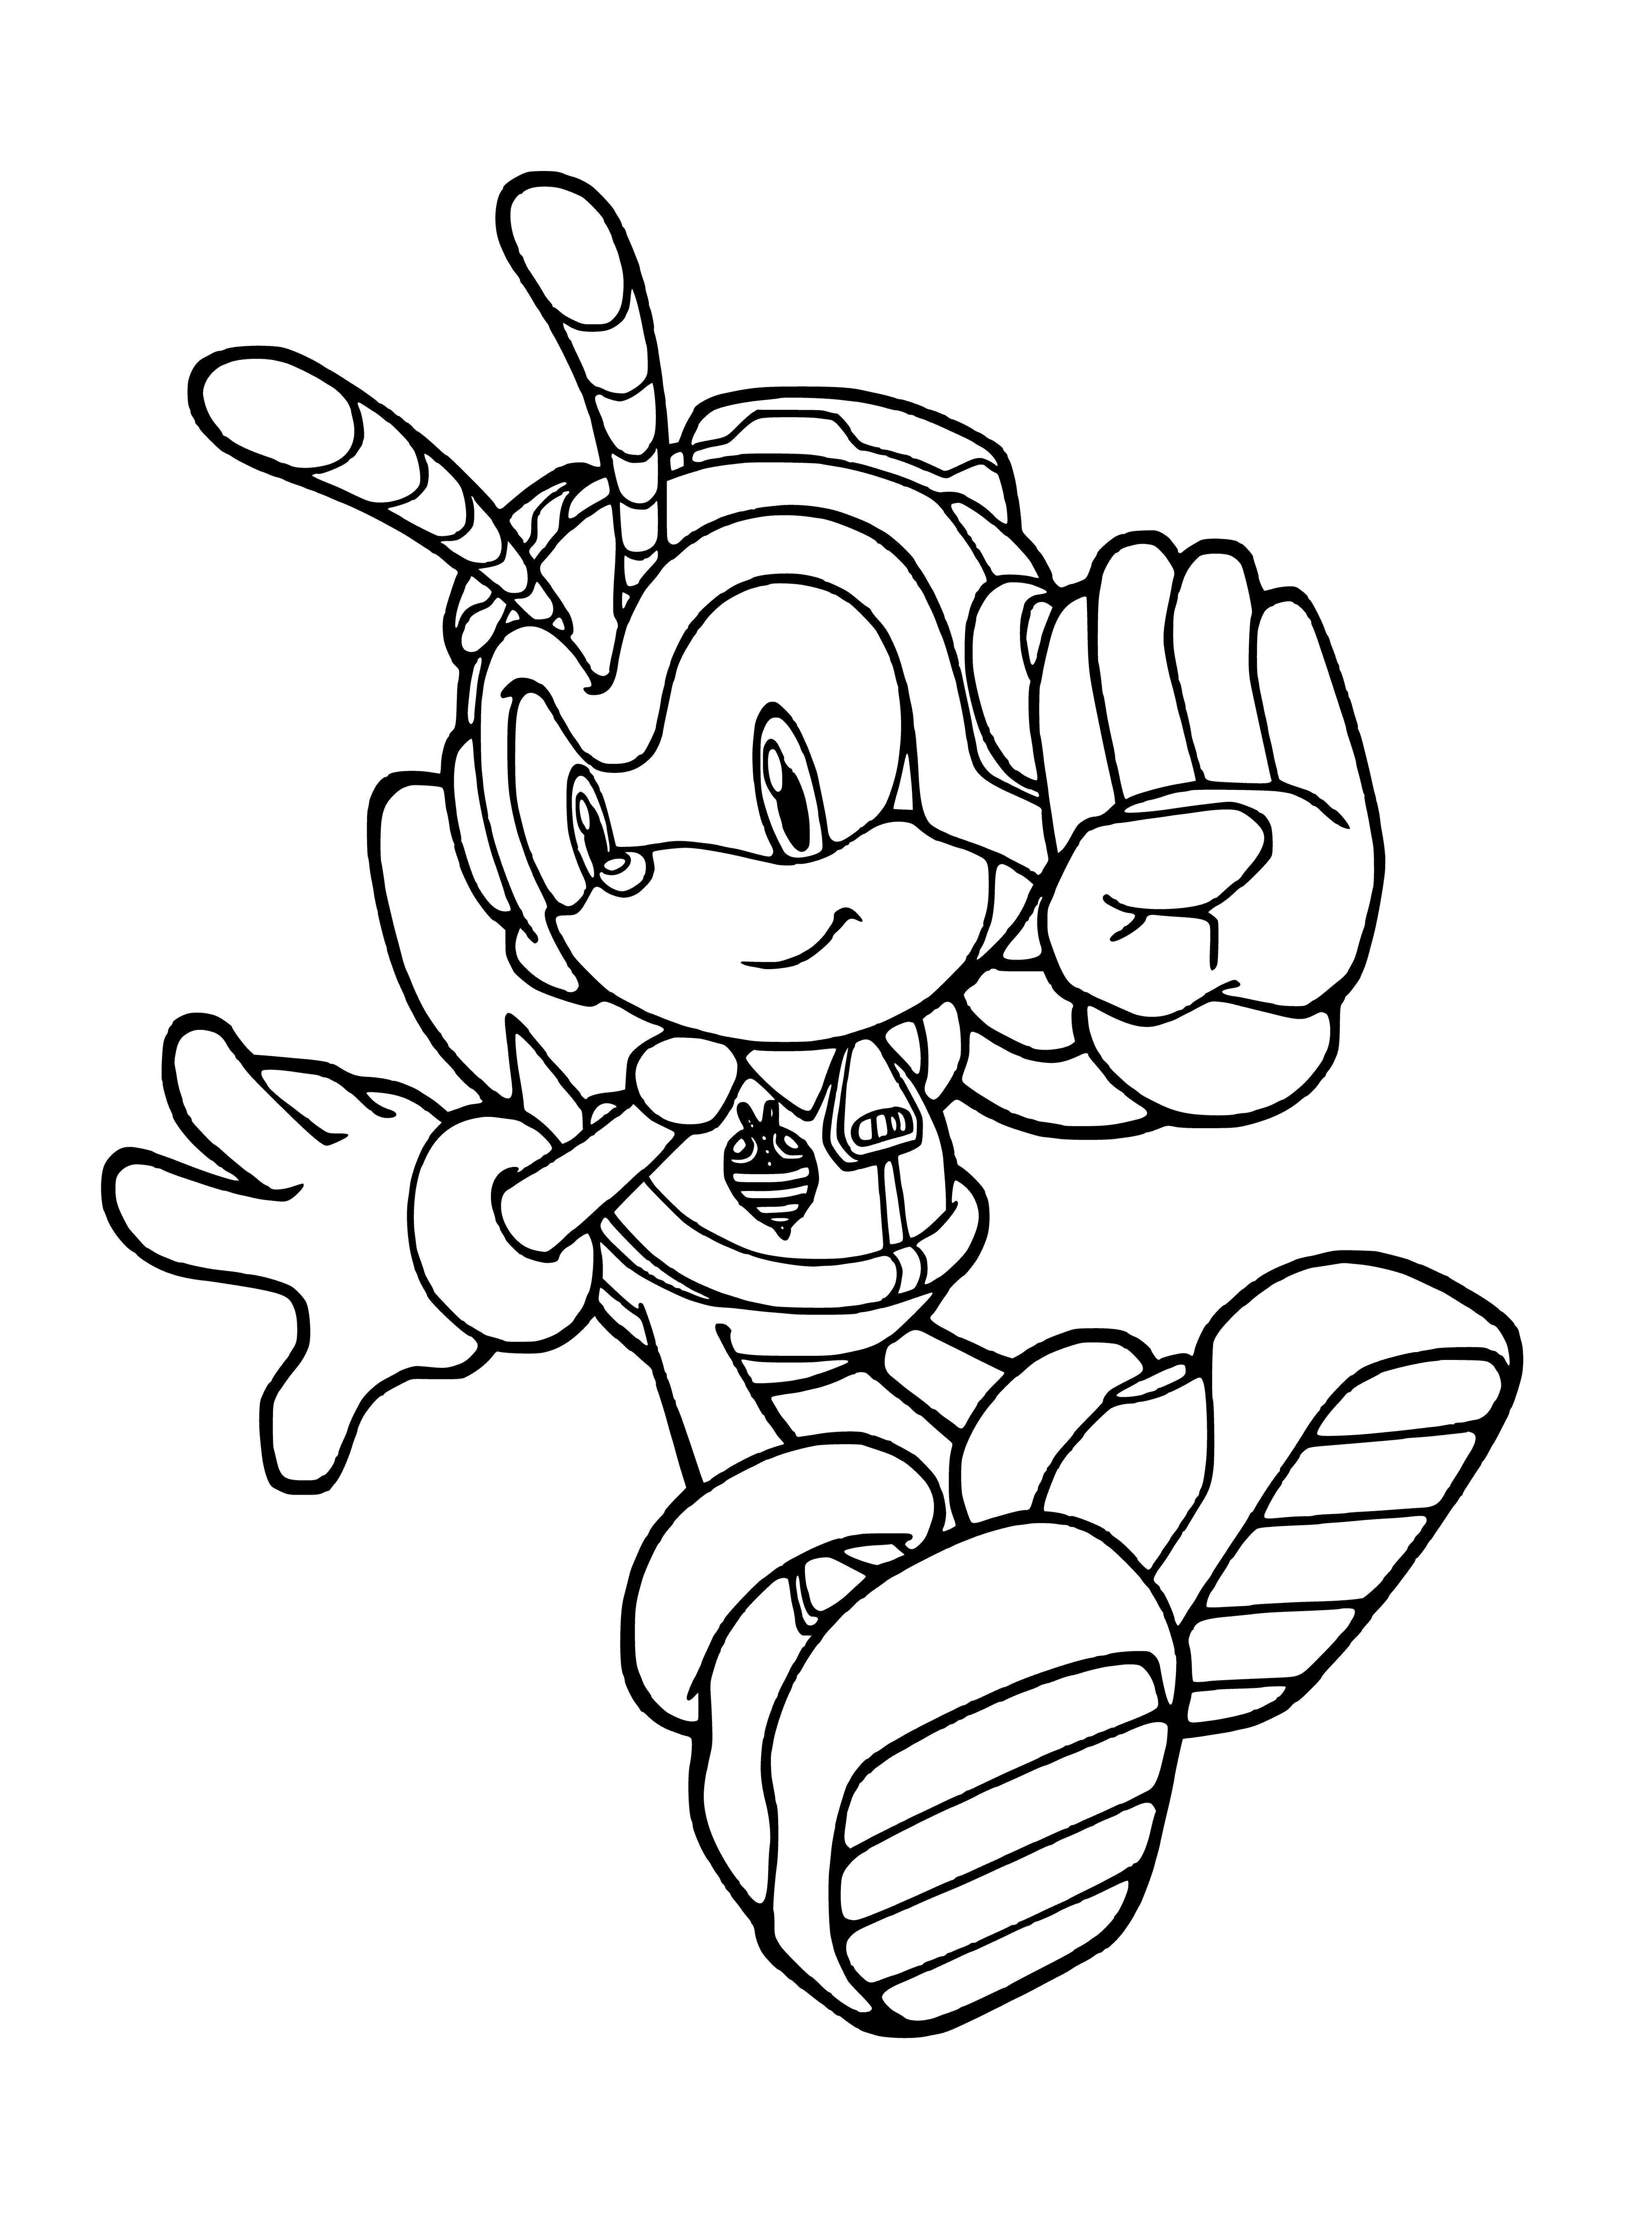 coloring page: Sonic X logo: black bg, yellow spiral & red ring w/white "S", white rect w/black "SONIC X", yellow lightening bolt & white star, "LEATHER" under rect.